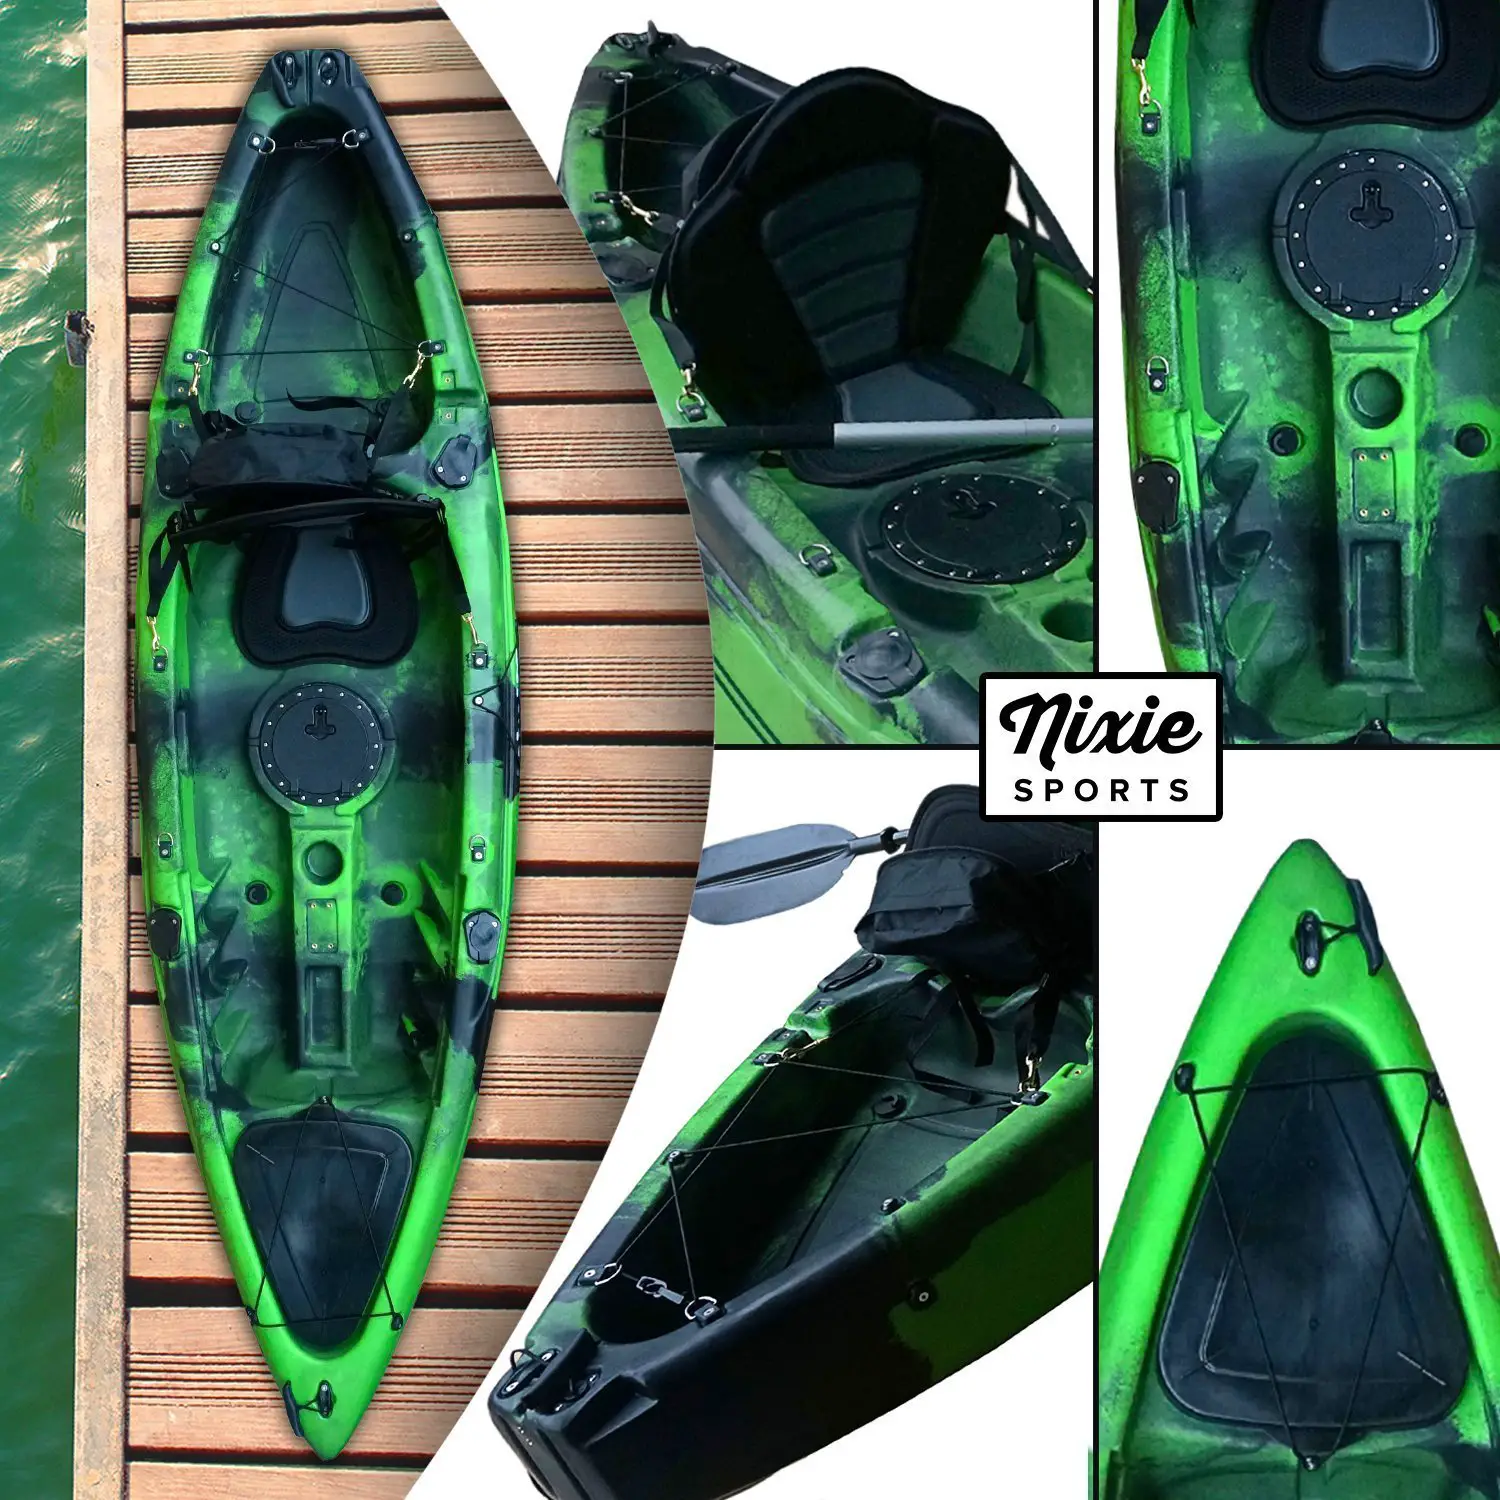 The Heritage Kayaks Featherlite 9.5 Angler Review 3